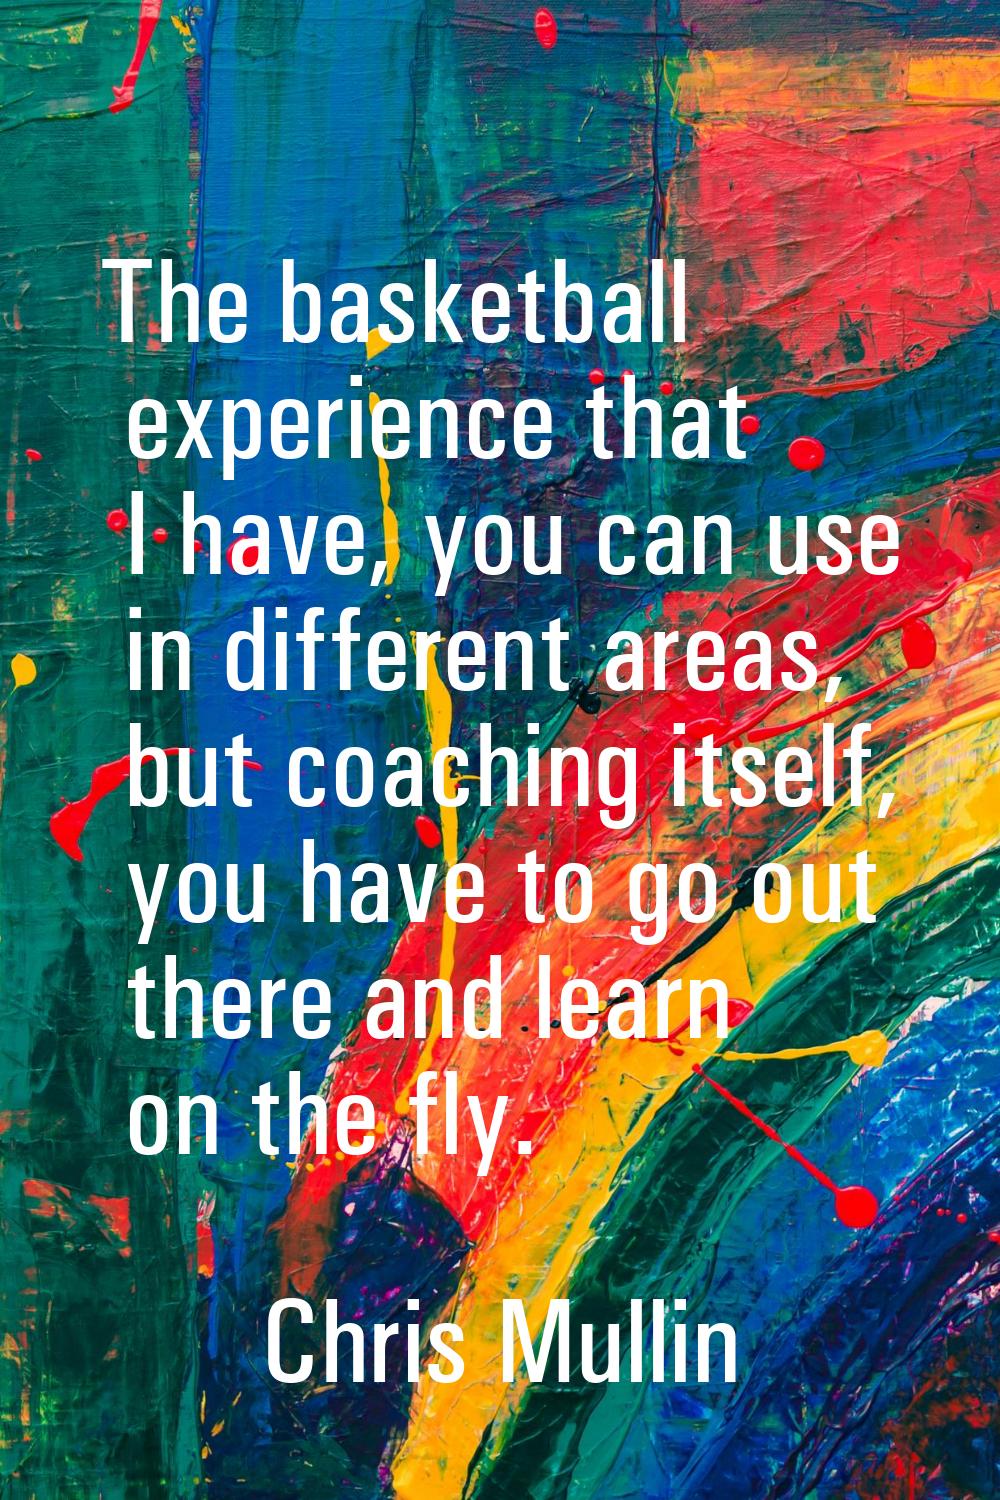 The basketball experience that I have, you can use in different areas, but coaching itself, you hav